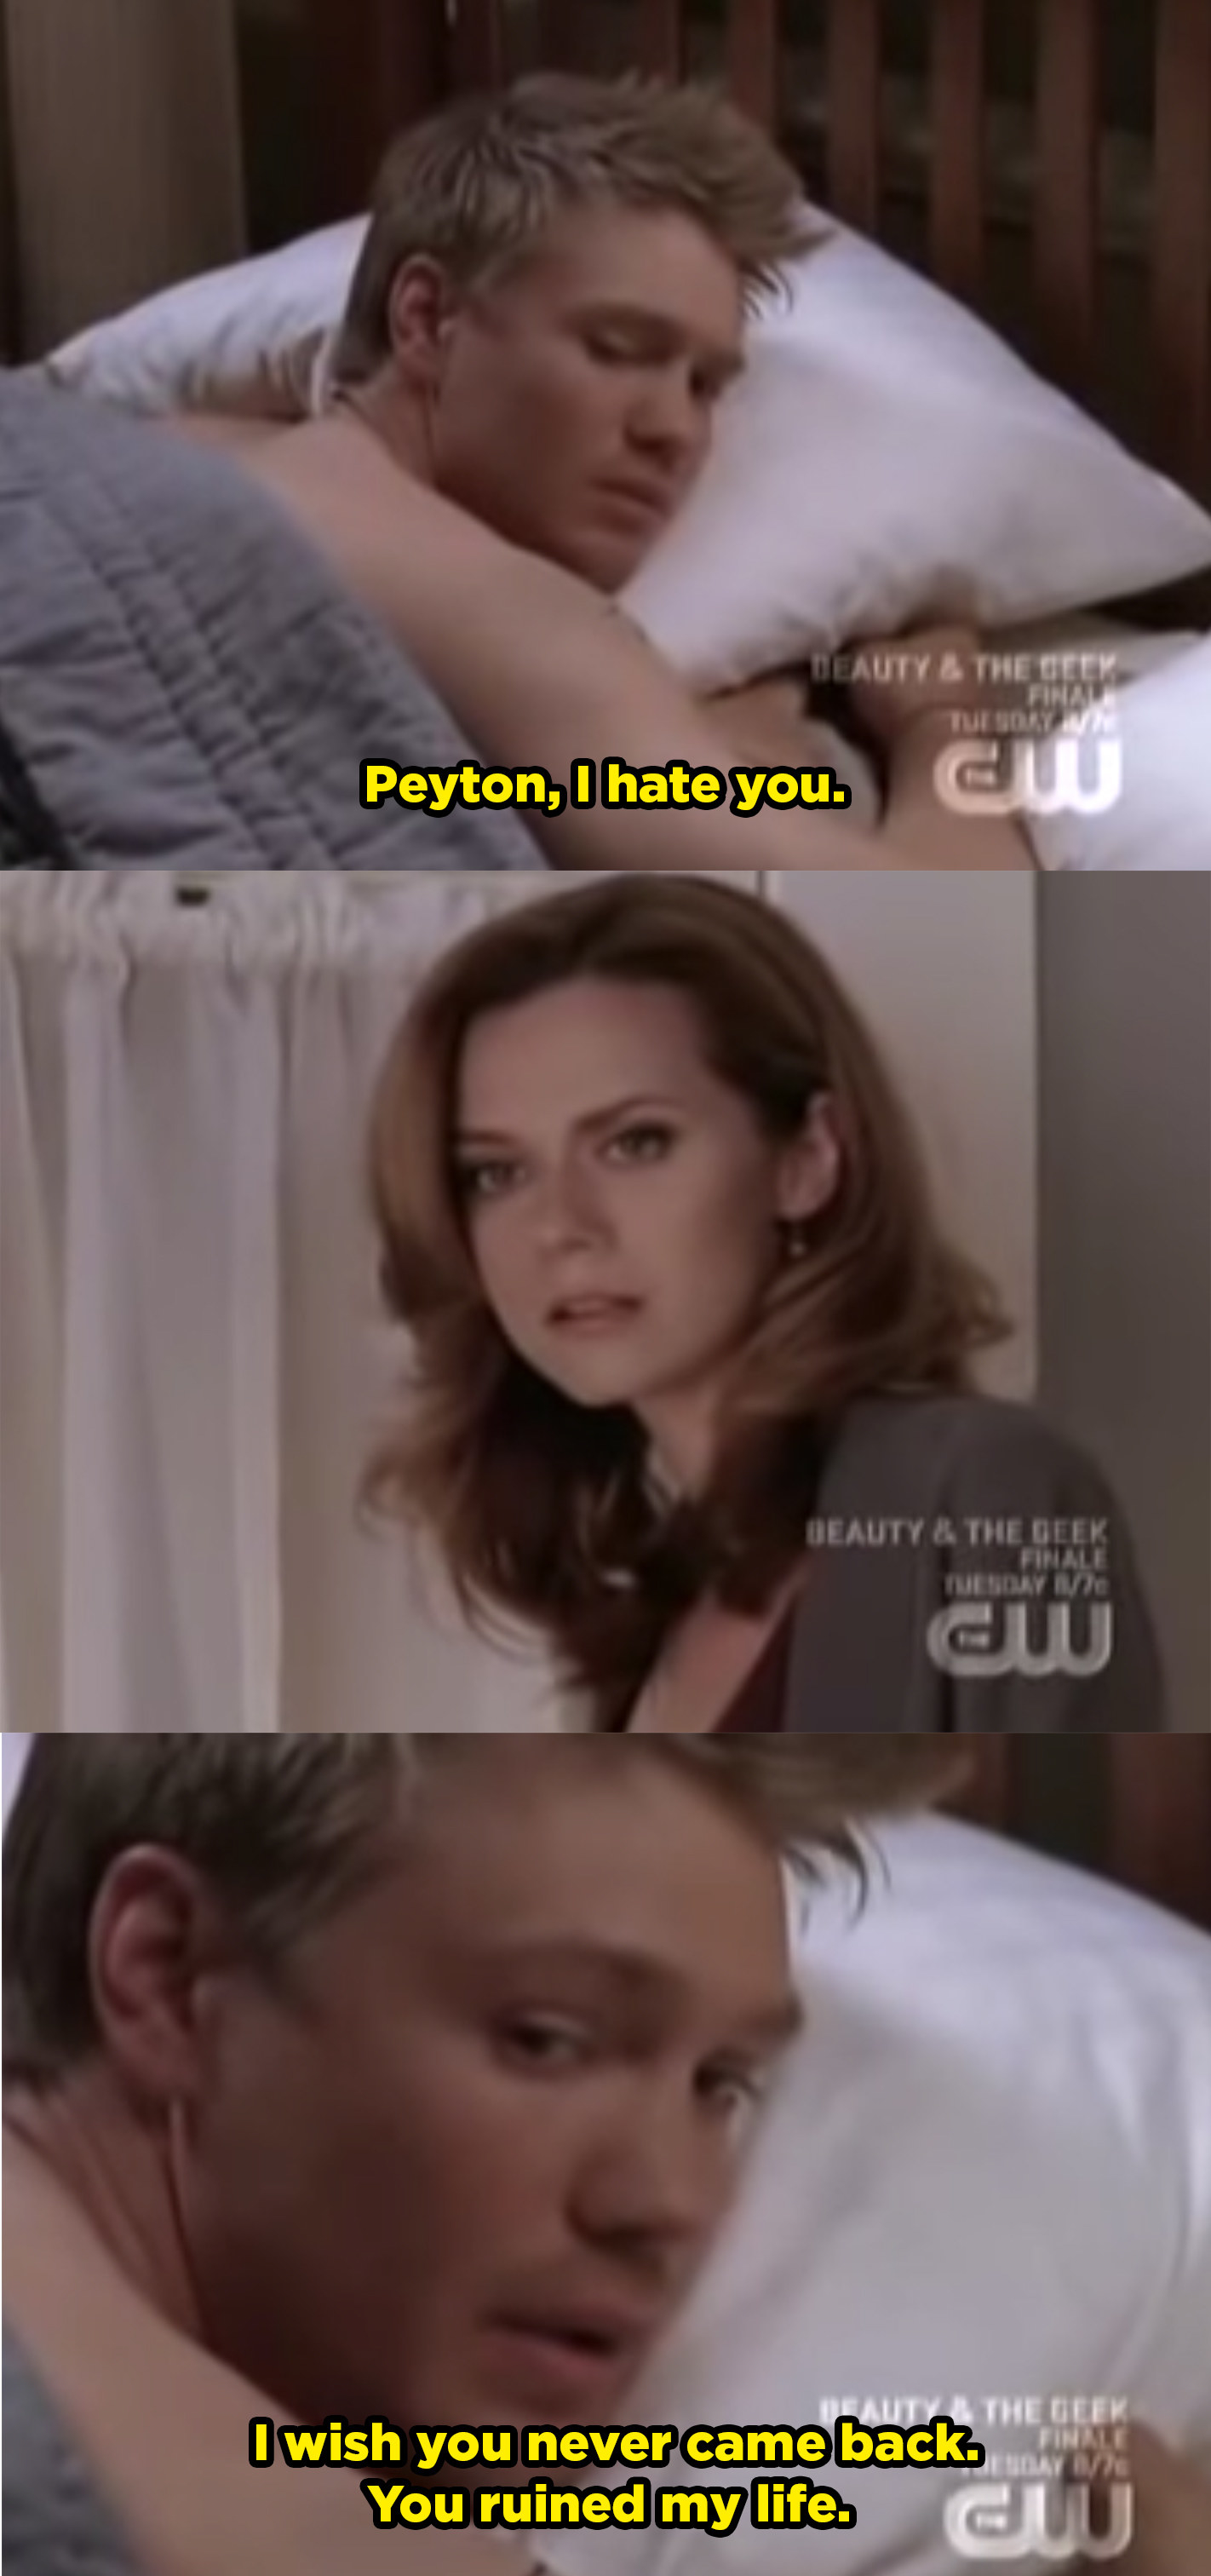 Lucas tells Peyton he hates her and that she ruined his life. 